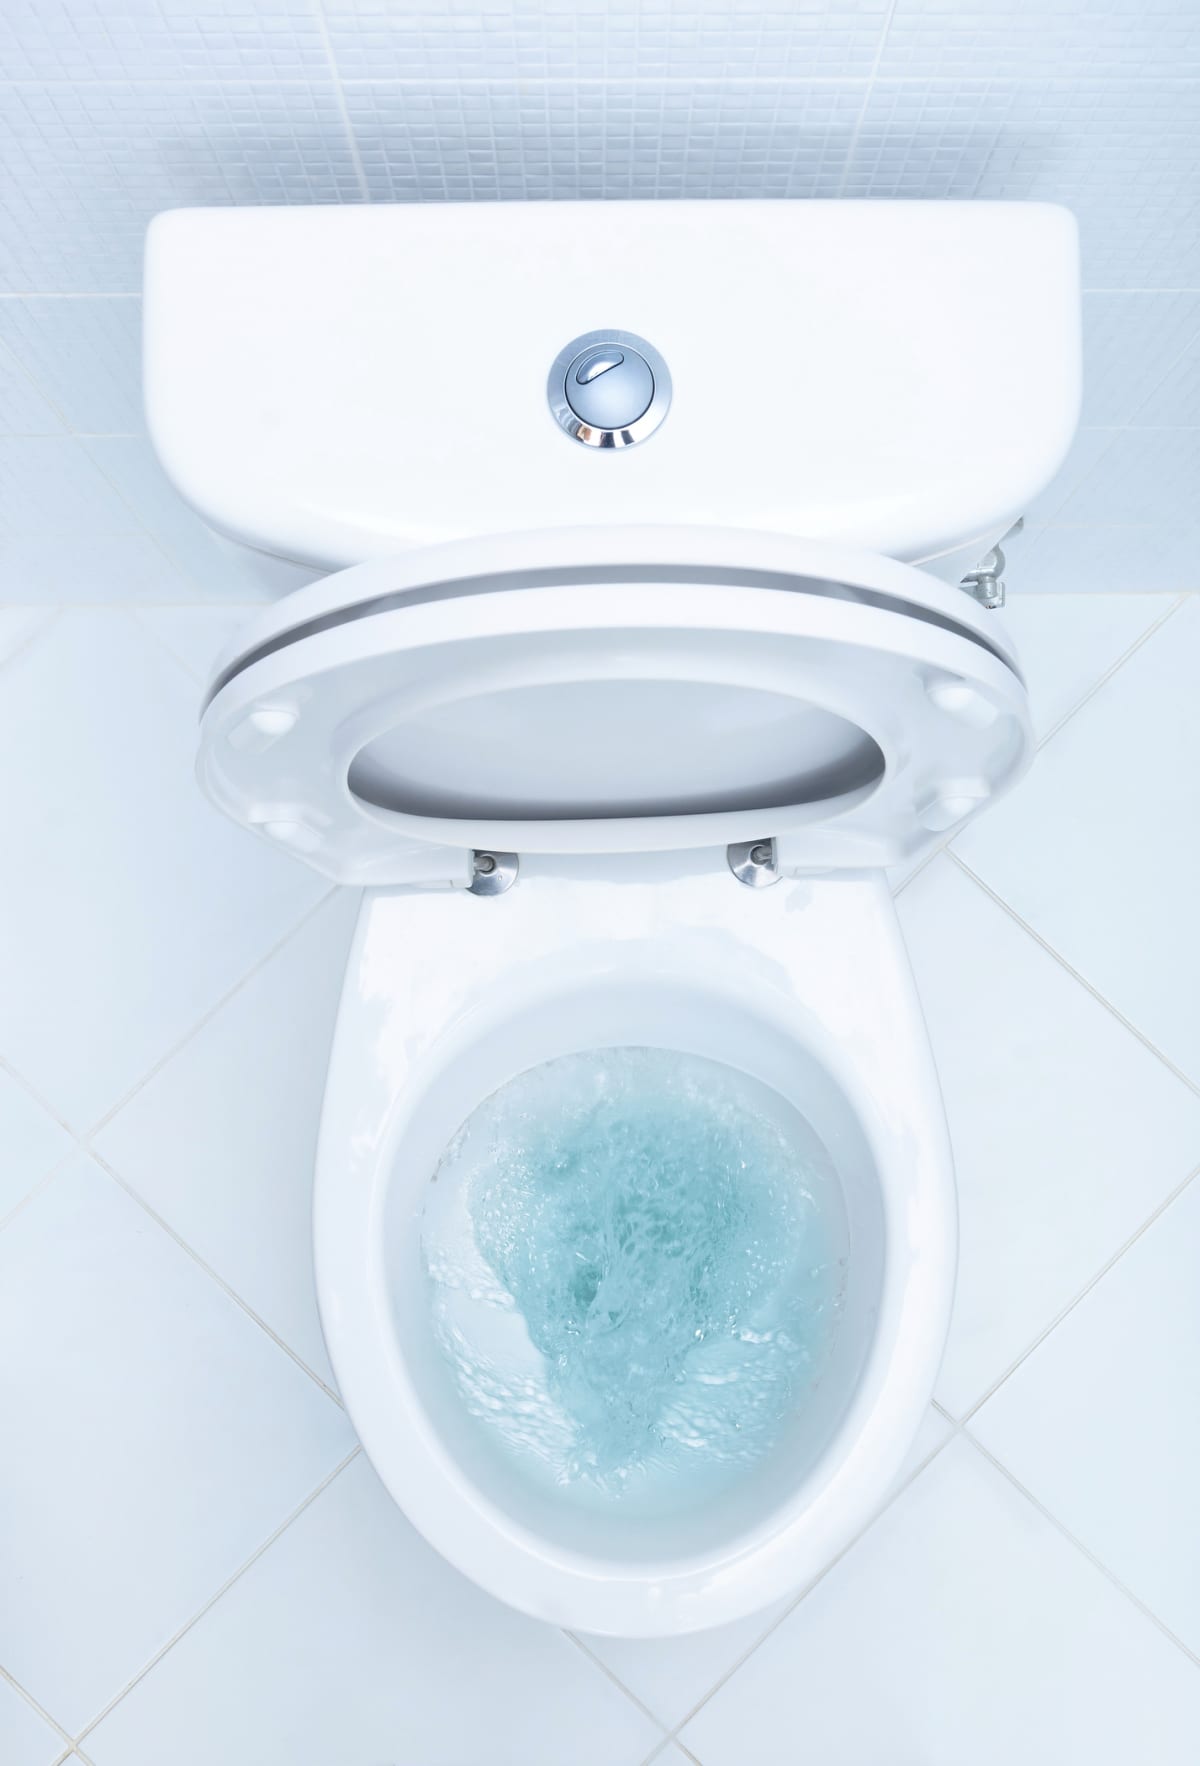 A clean, stain-free toilet in the bathroom